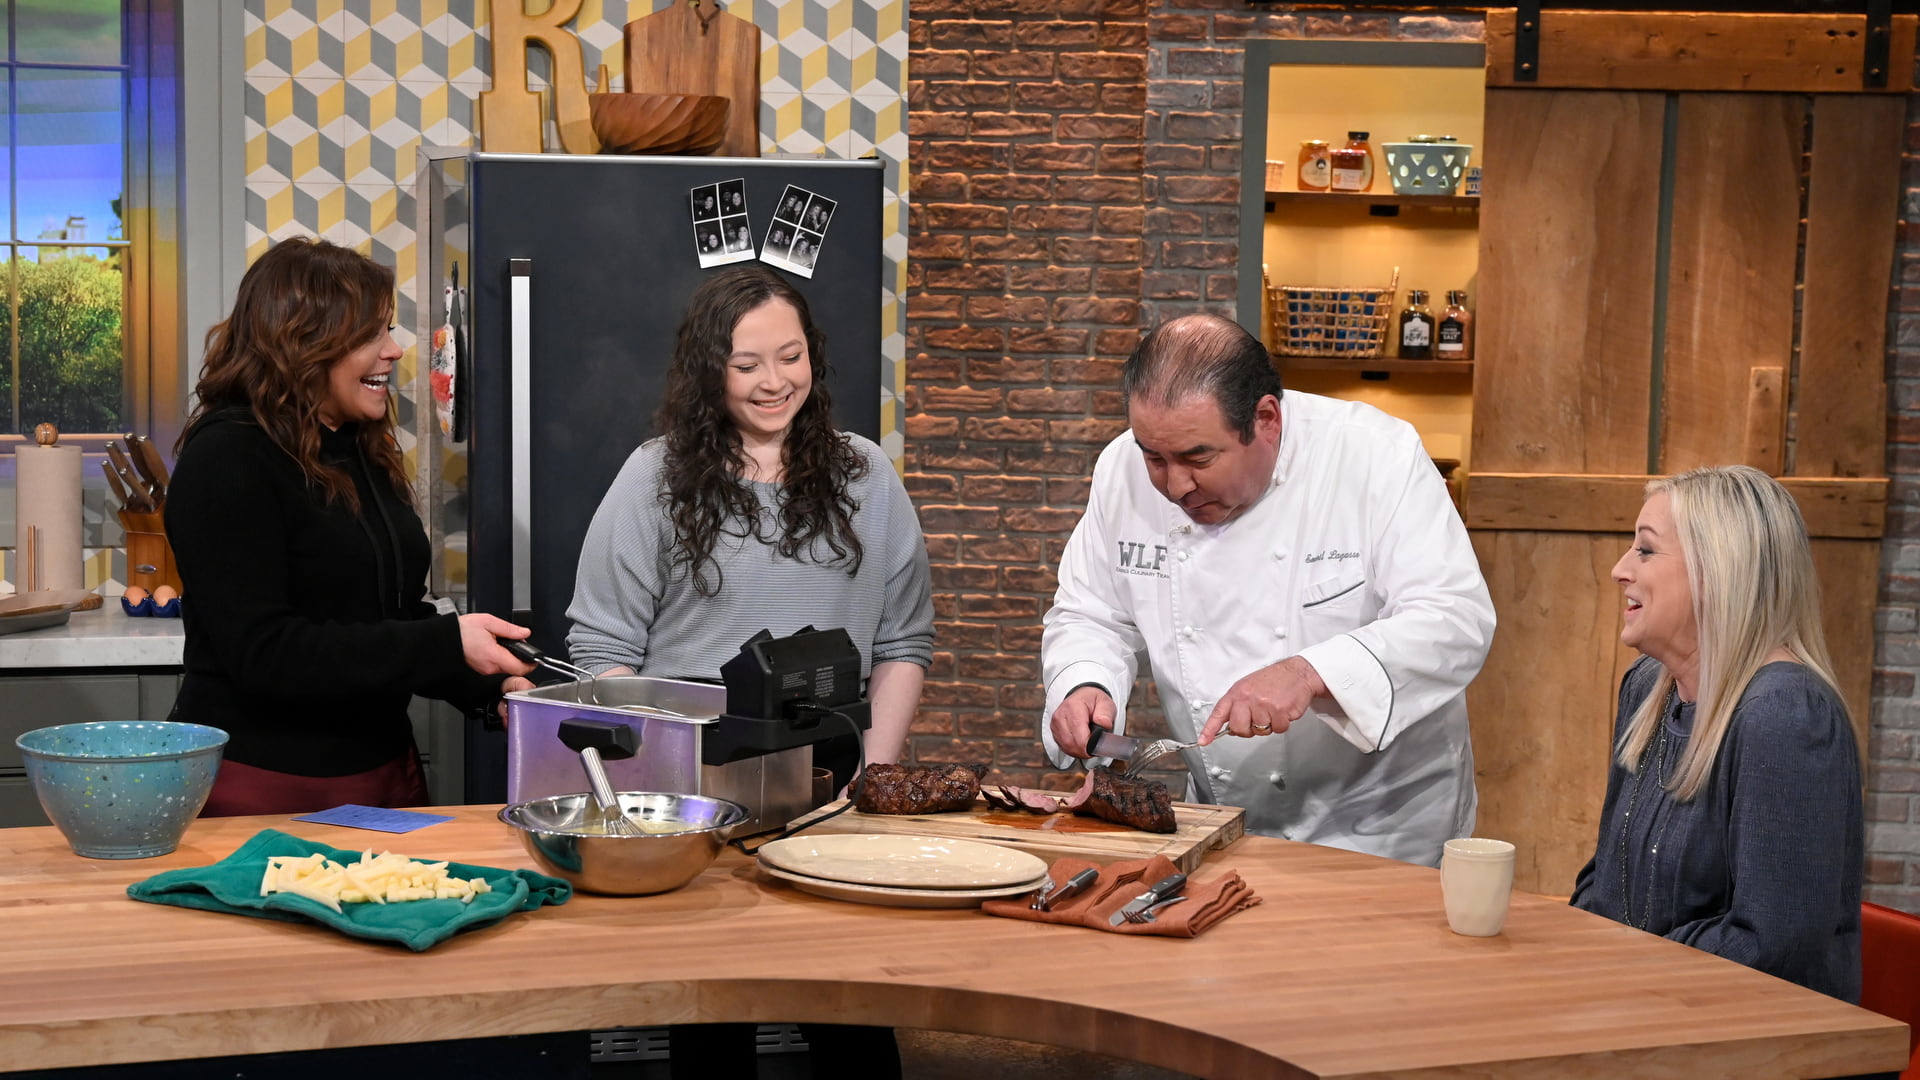 JWU student Alyssa Rosenthal cooking with Emeril on the Rachael Ray Show | Photo: David M. Russell/Rachael Ray Show